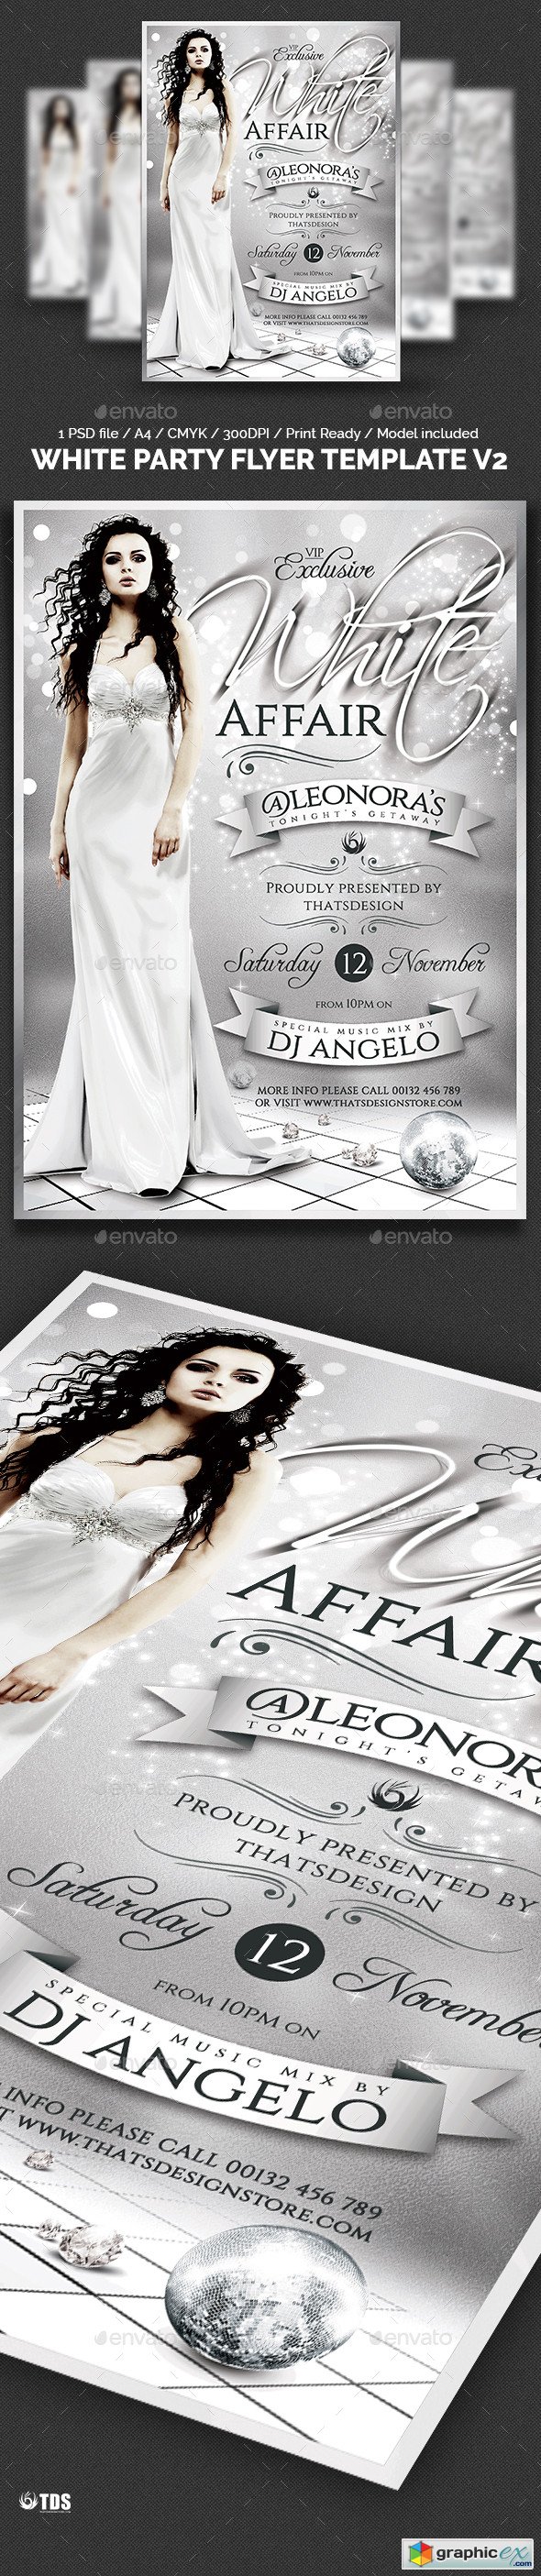 White Party Flyer Template V2